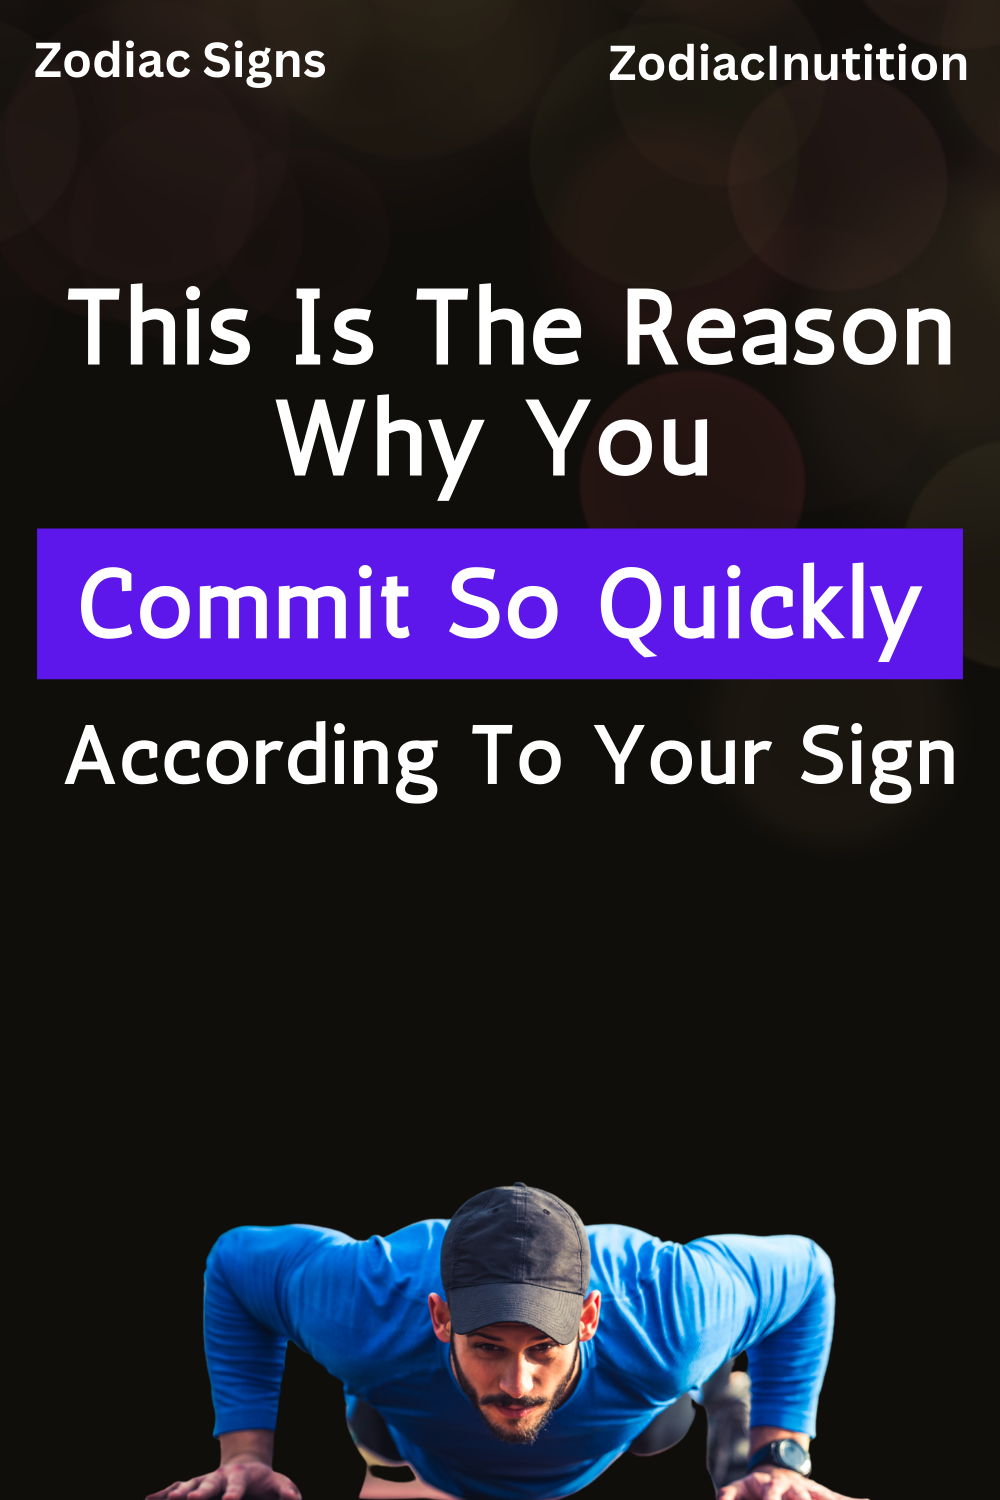 According To Your Sign, This Is The Reason Why You Commit So Quickly